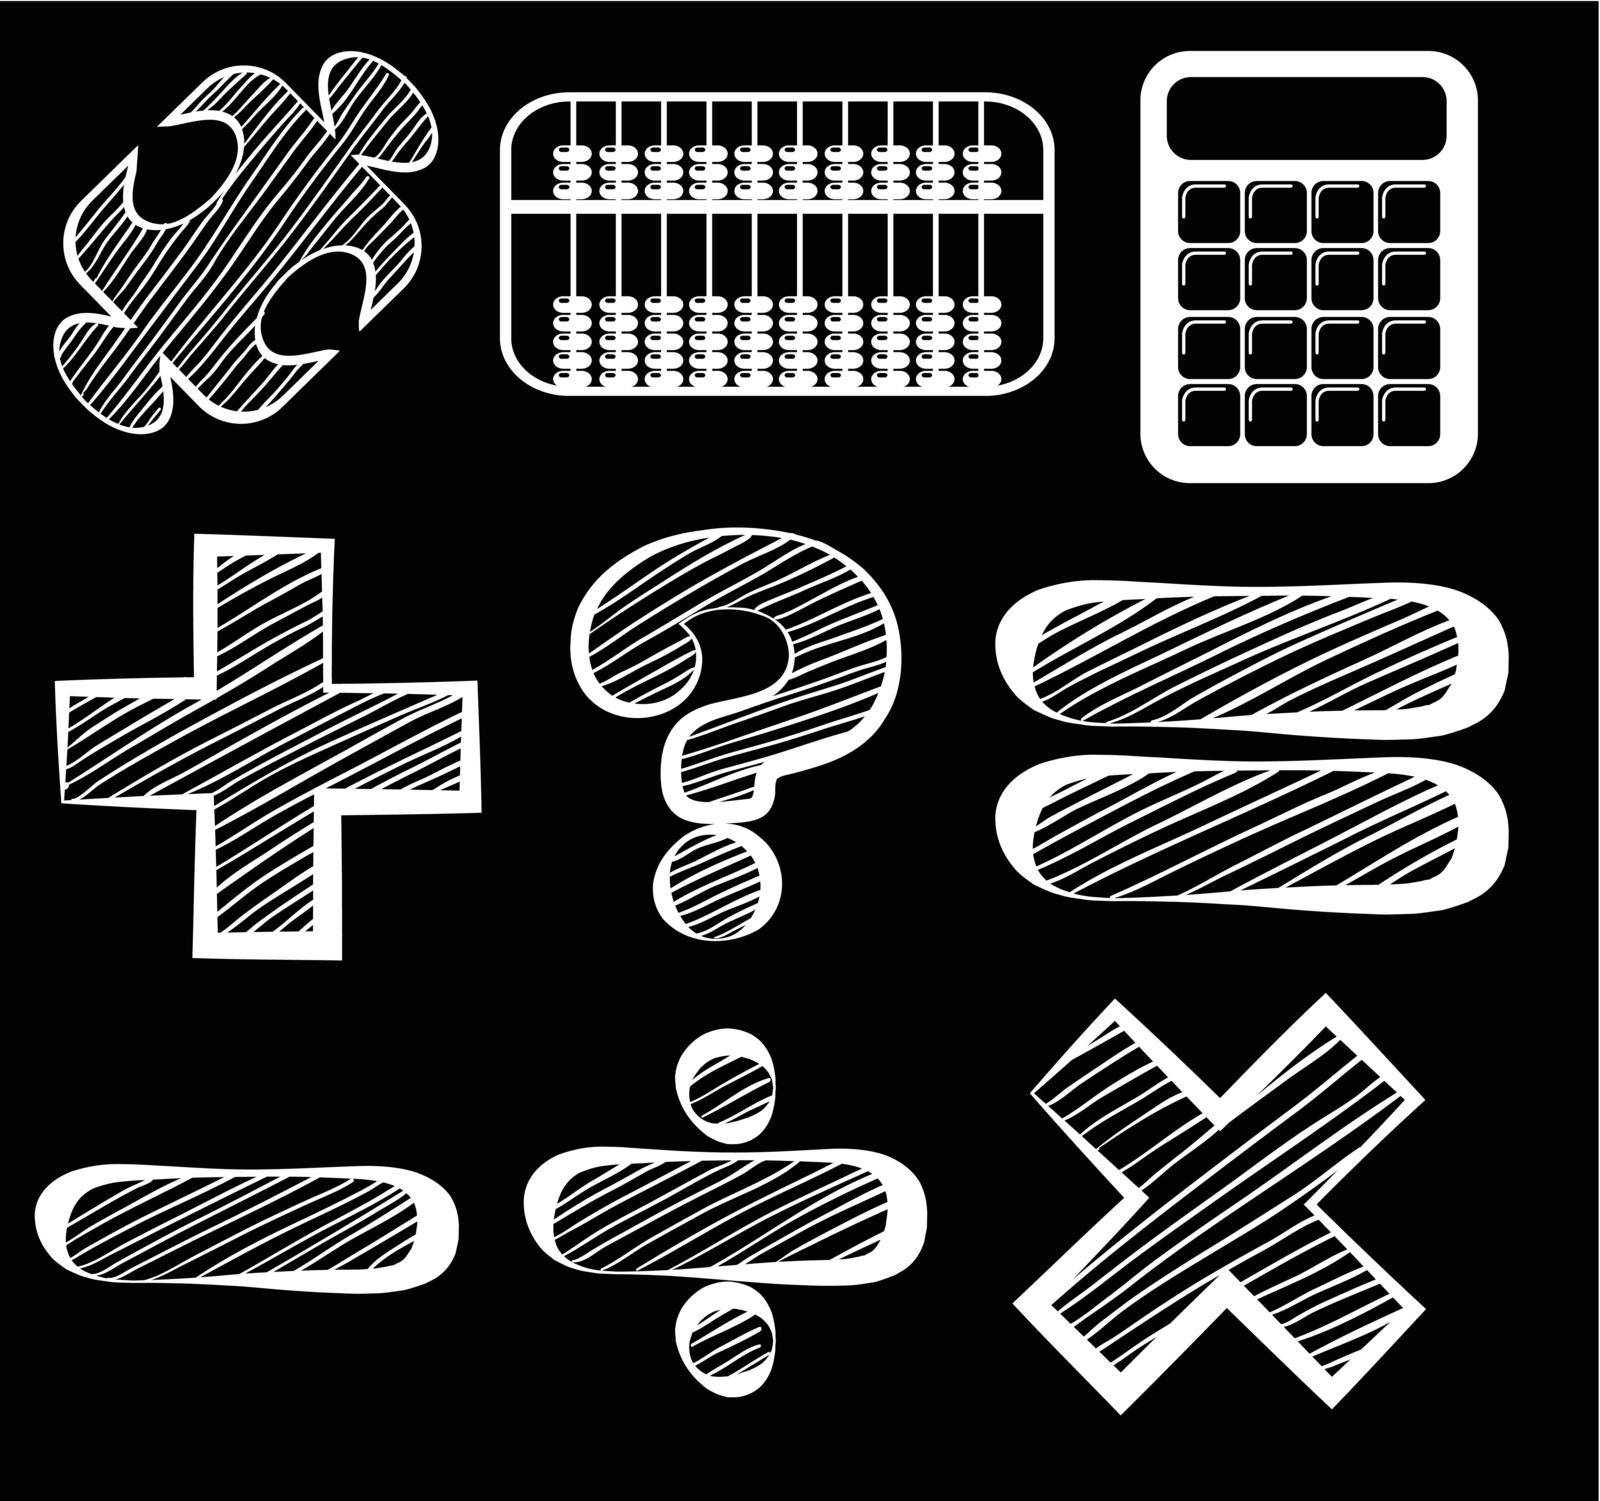 Illustration of the different mathematical symbols on a black background